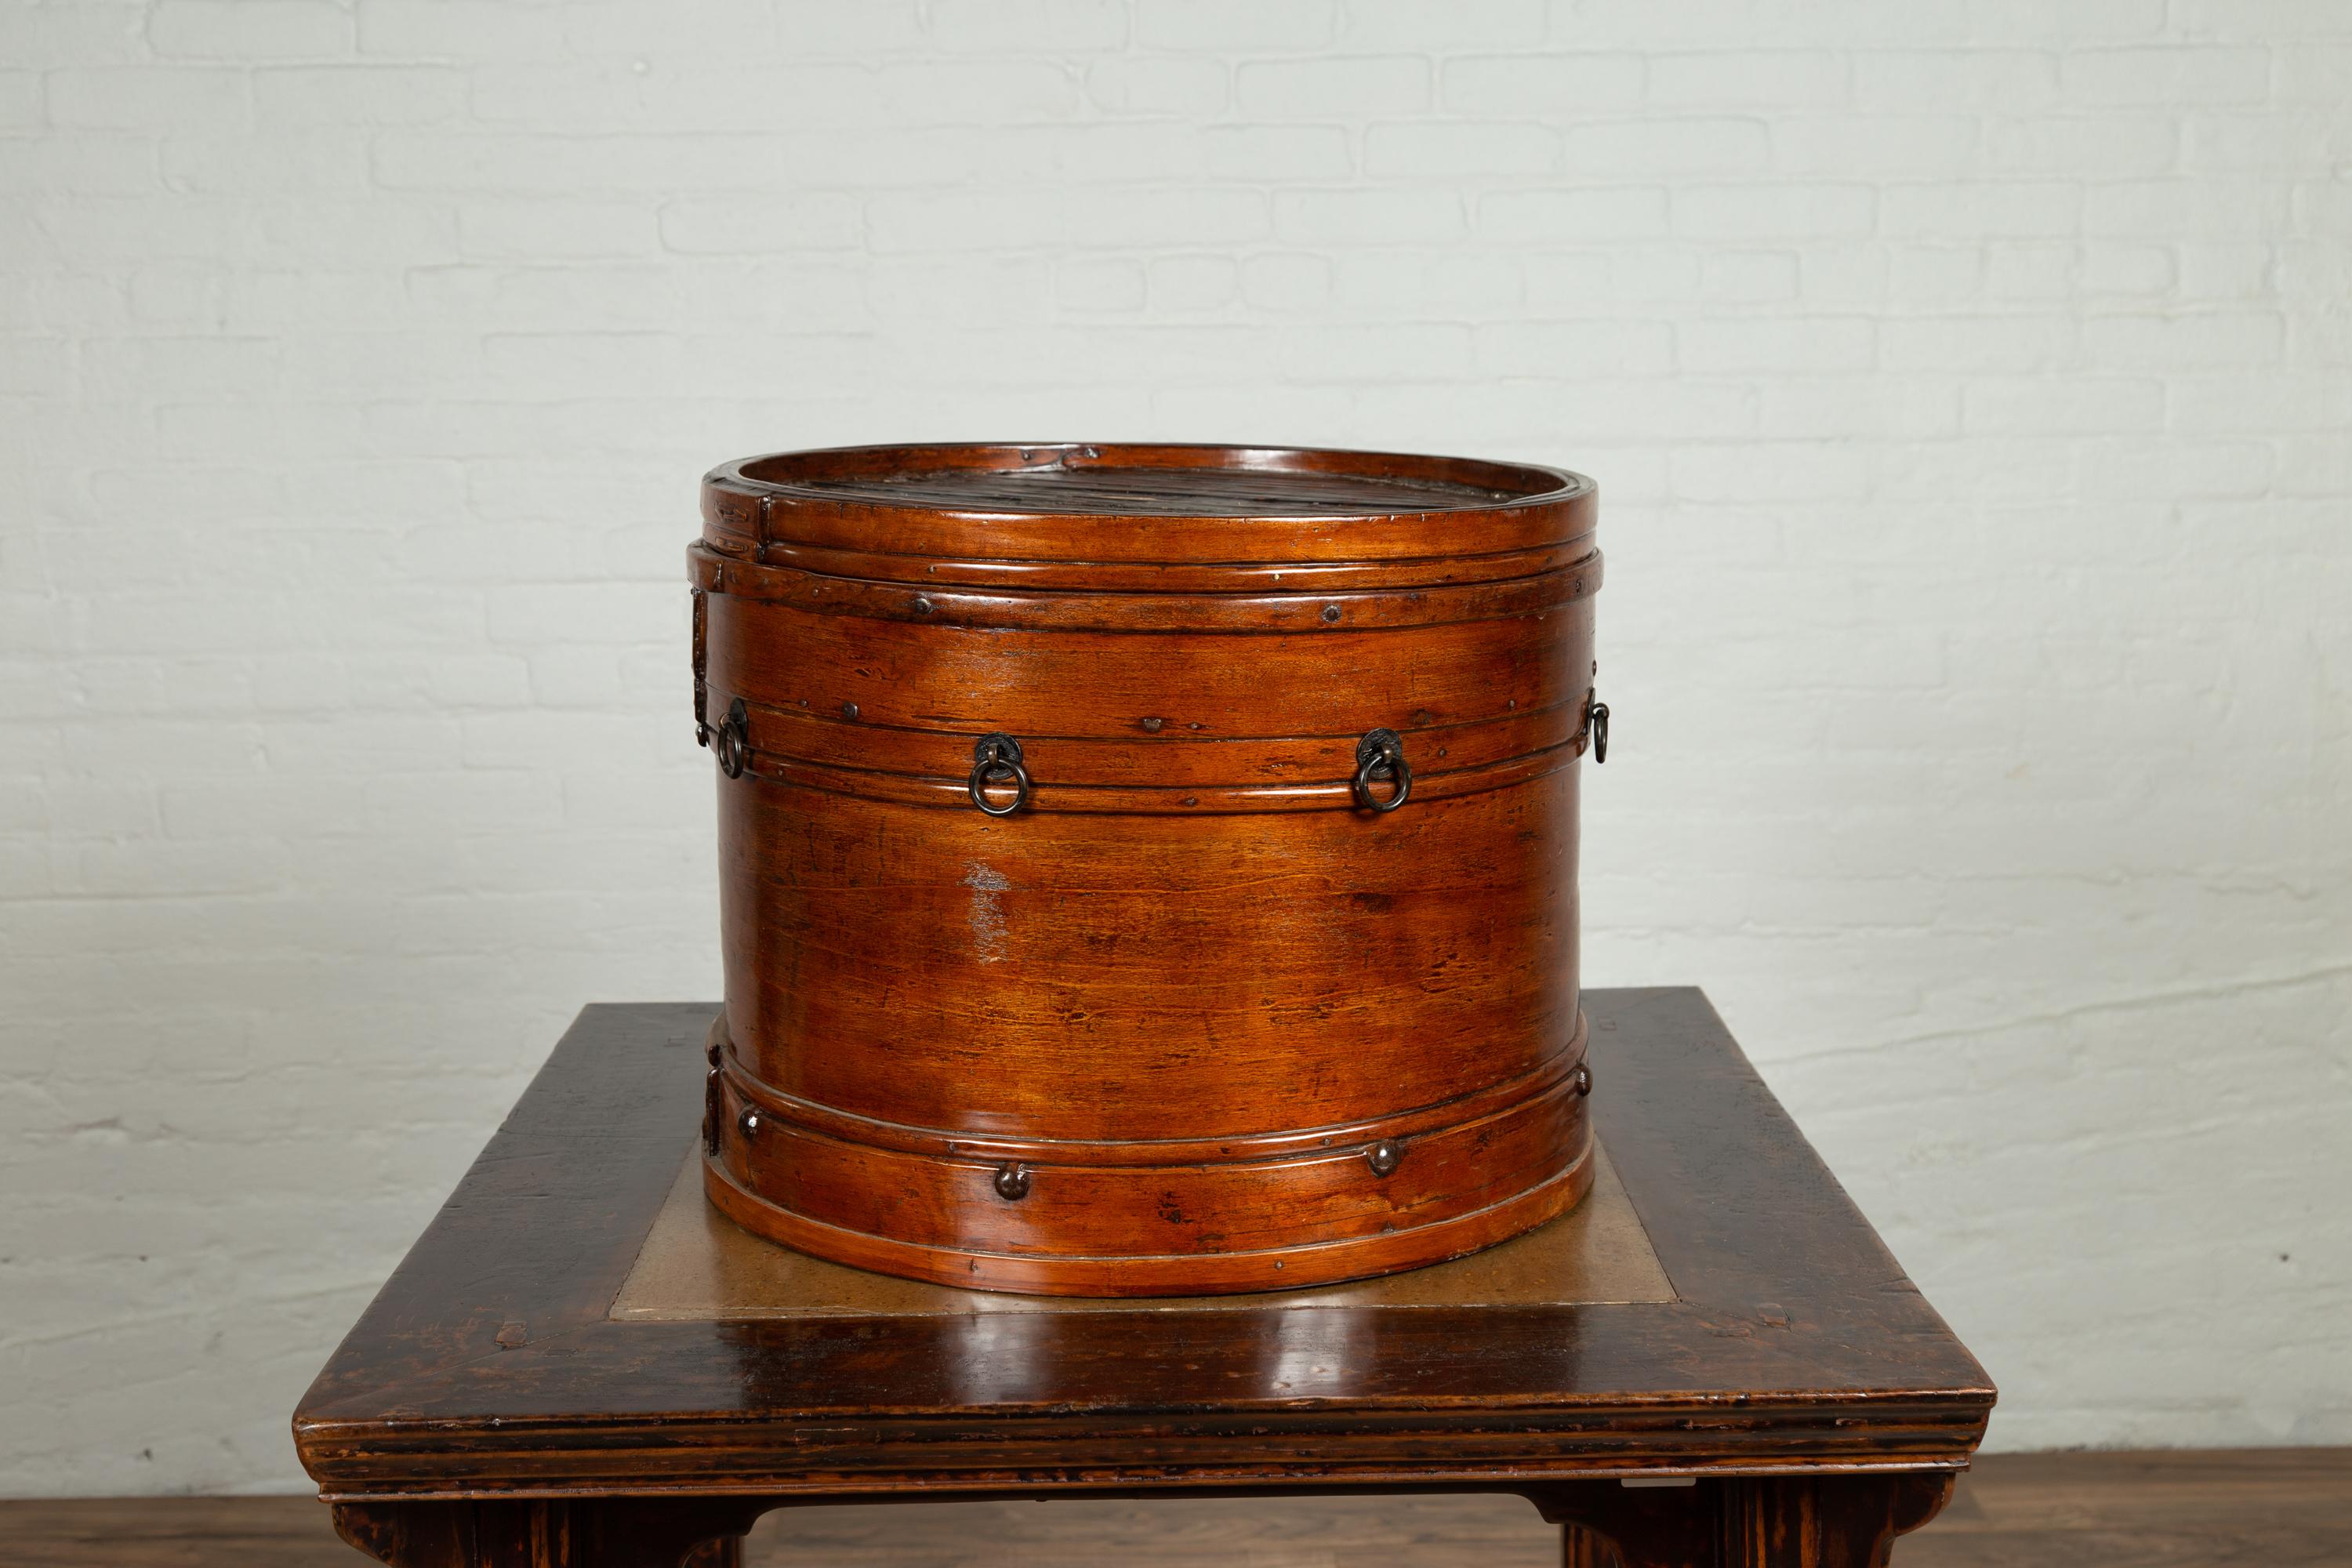 Qing Dynasty 19th Century Round Lidded Wooden Box with Rattan Top For Sale 2